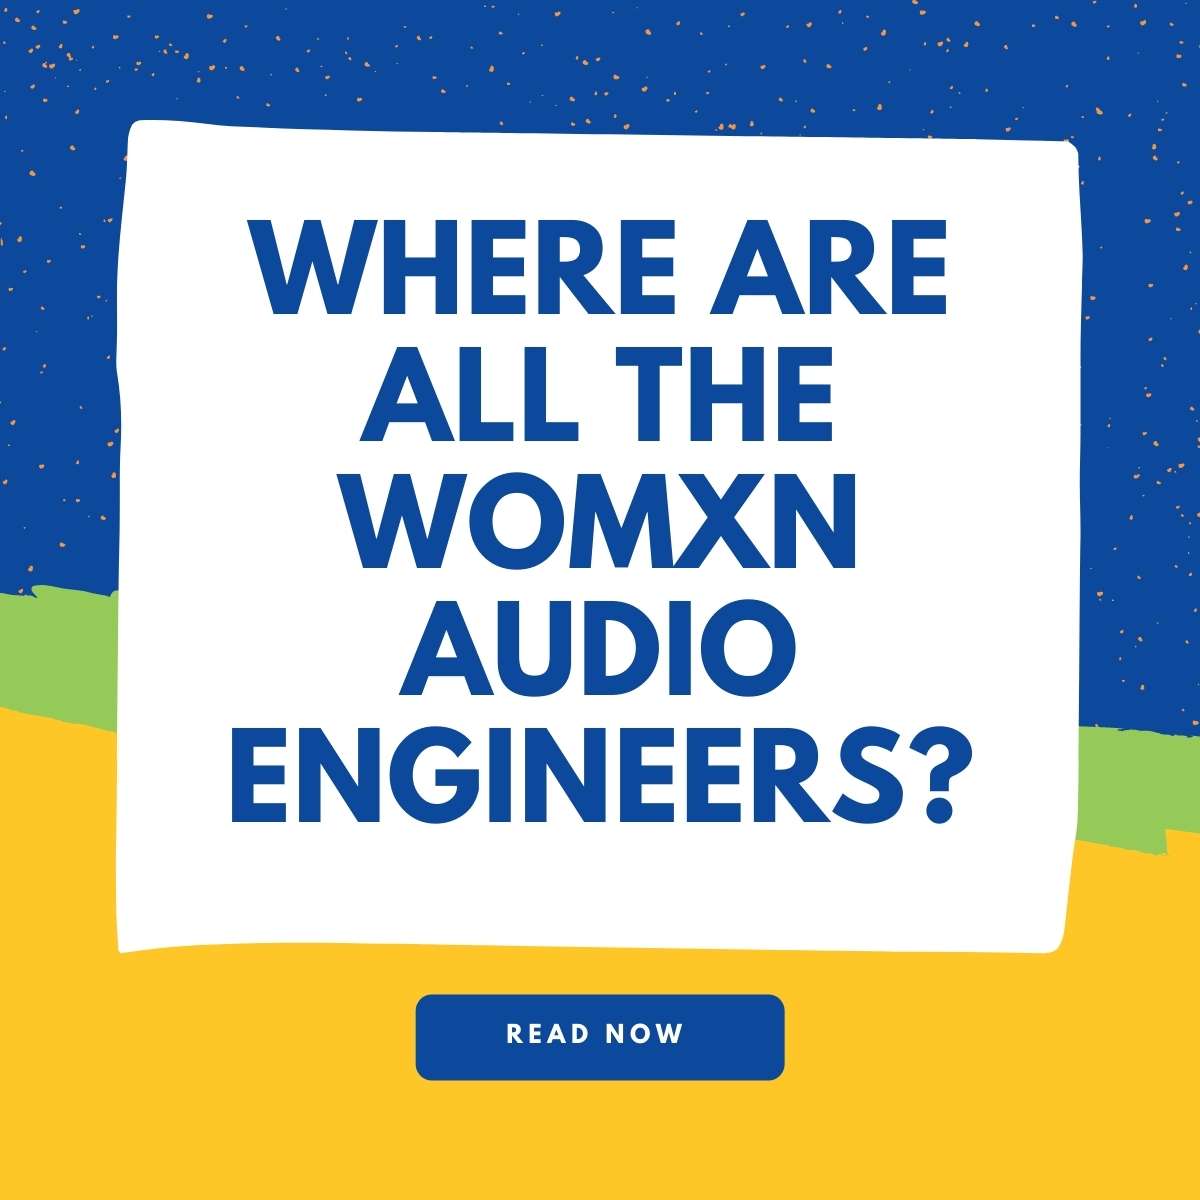 Where are all the womxn audio engineers?